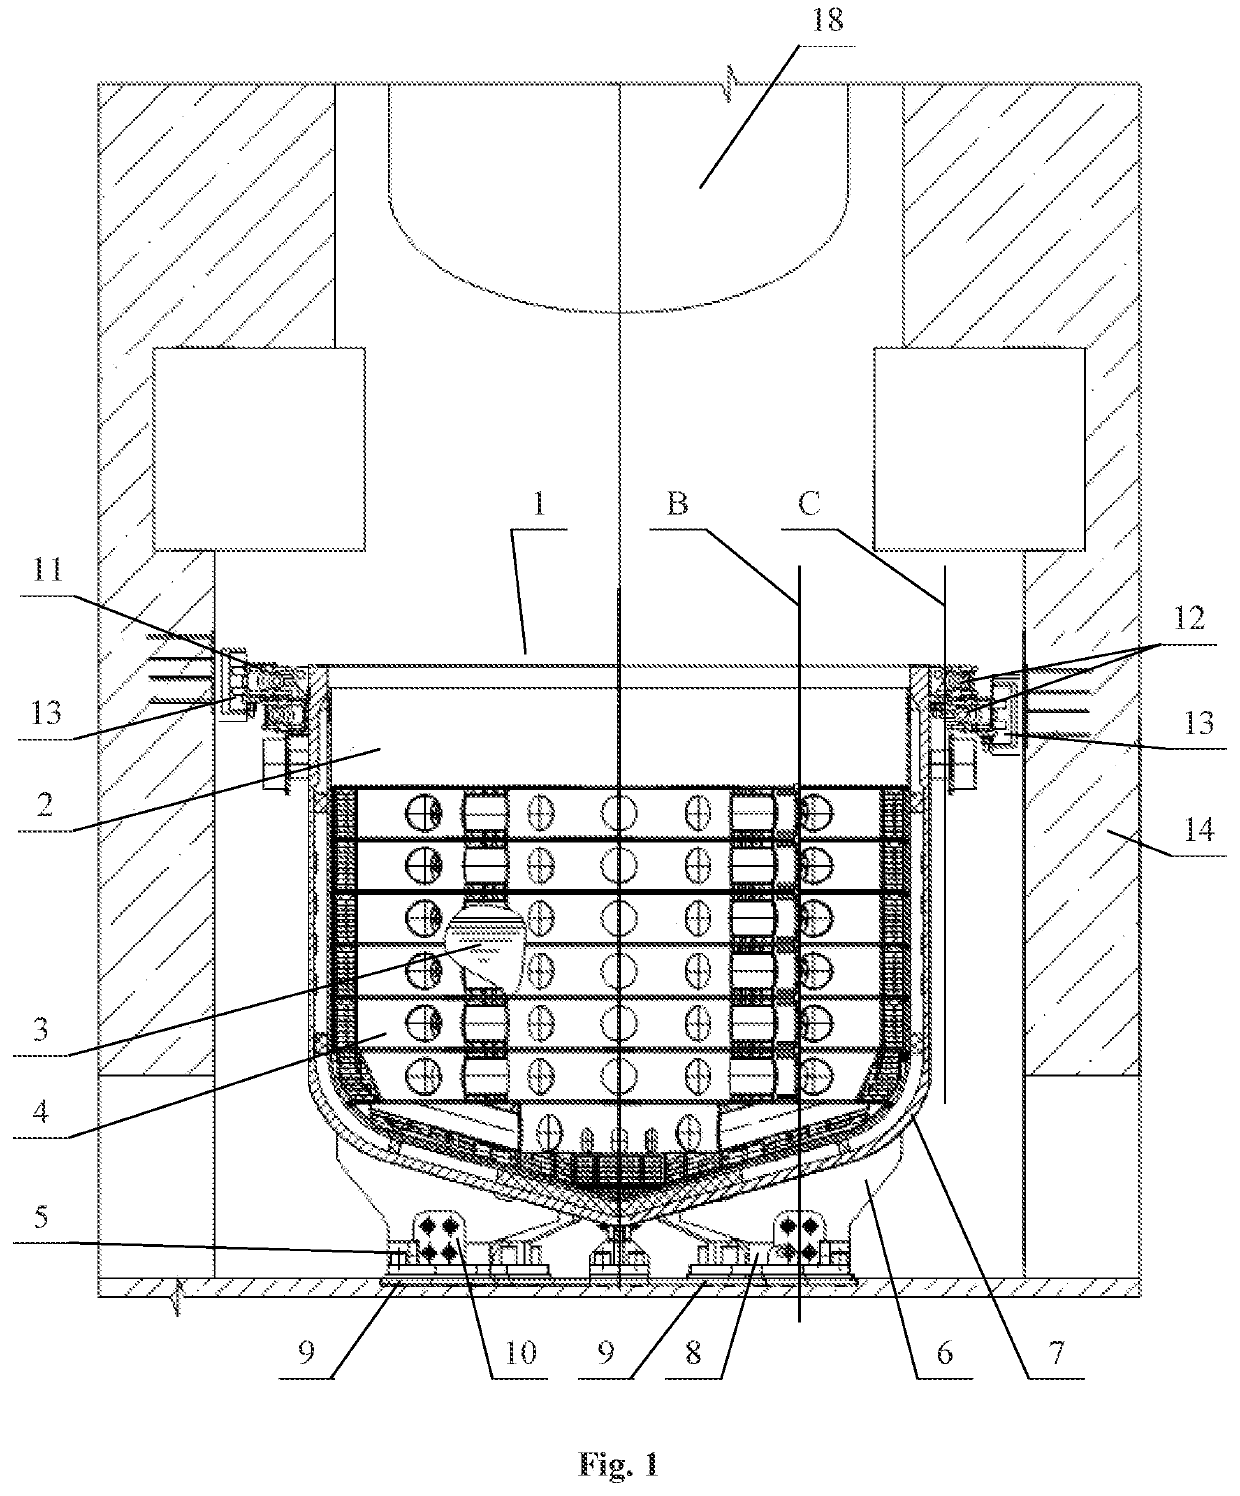 Device for confining nuclear reactor core melt